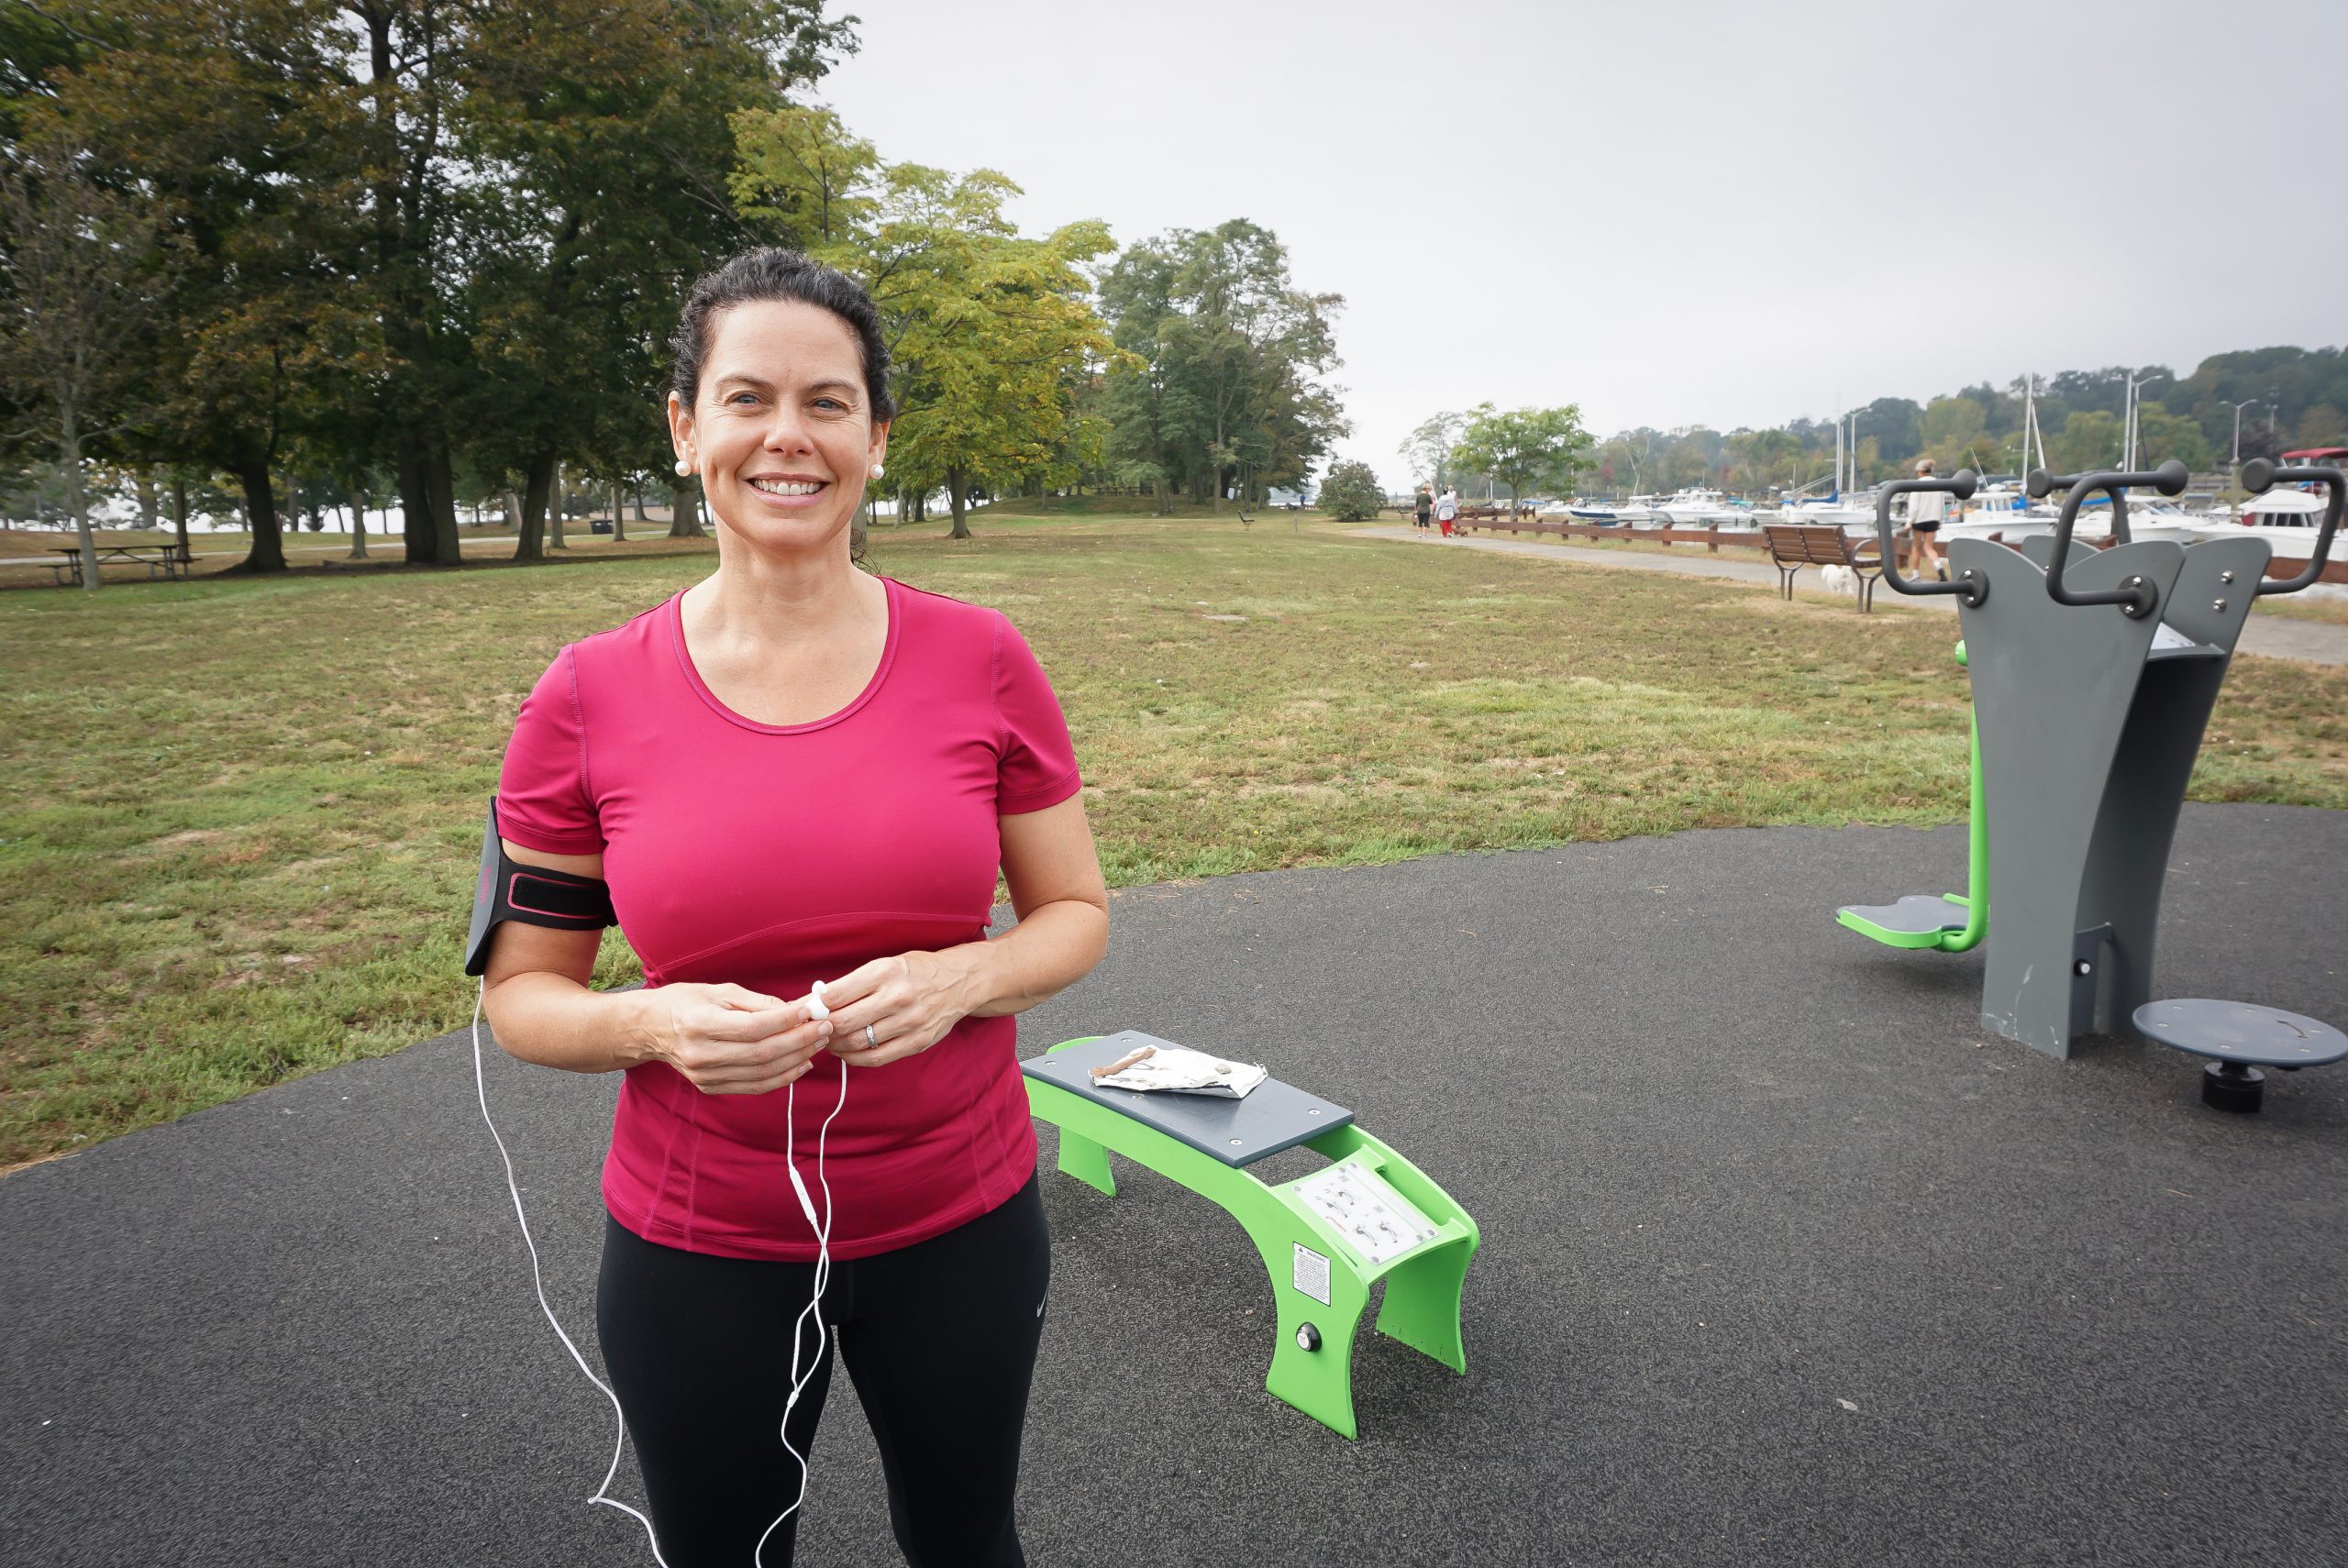 A woman in workout garb at an outdoor exercise area